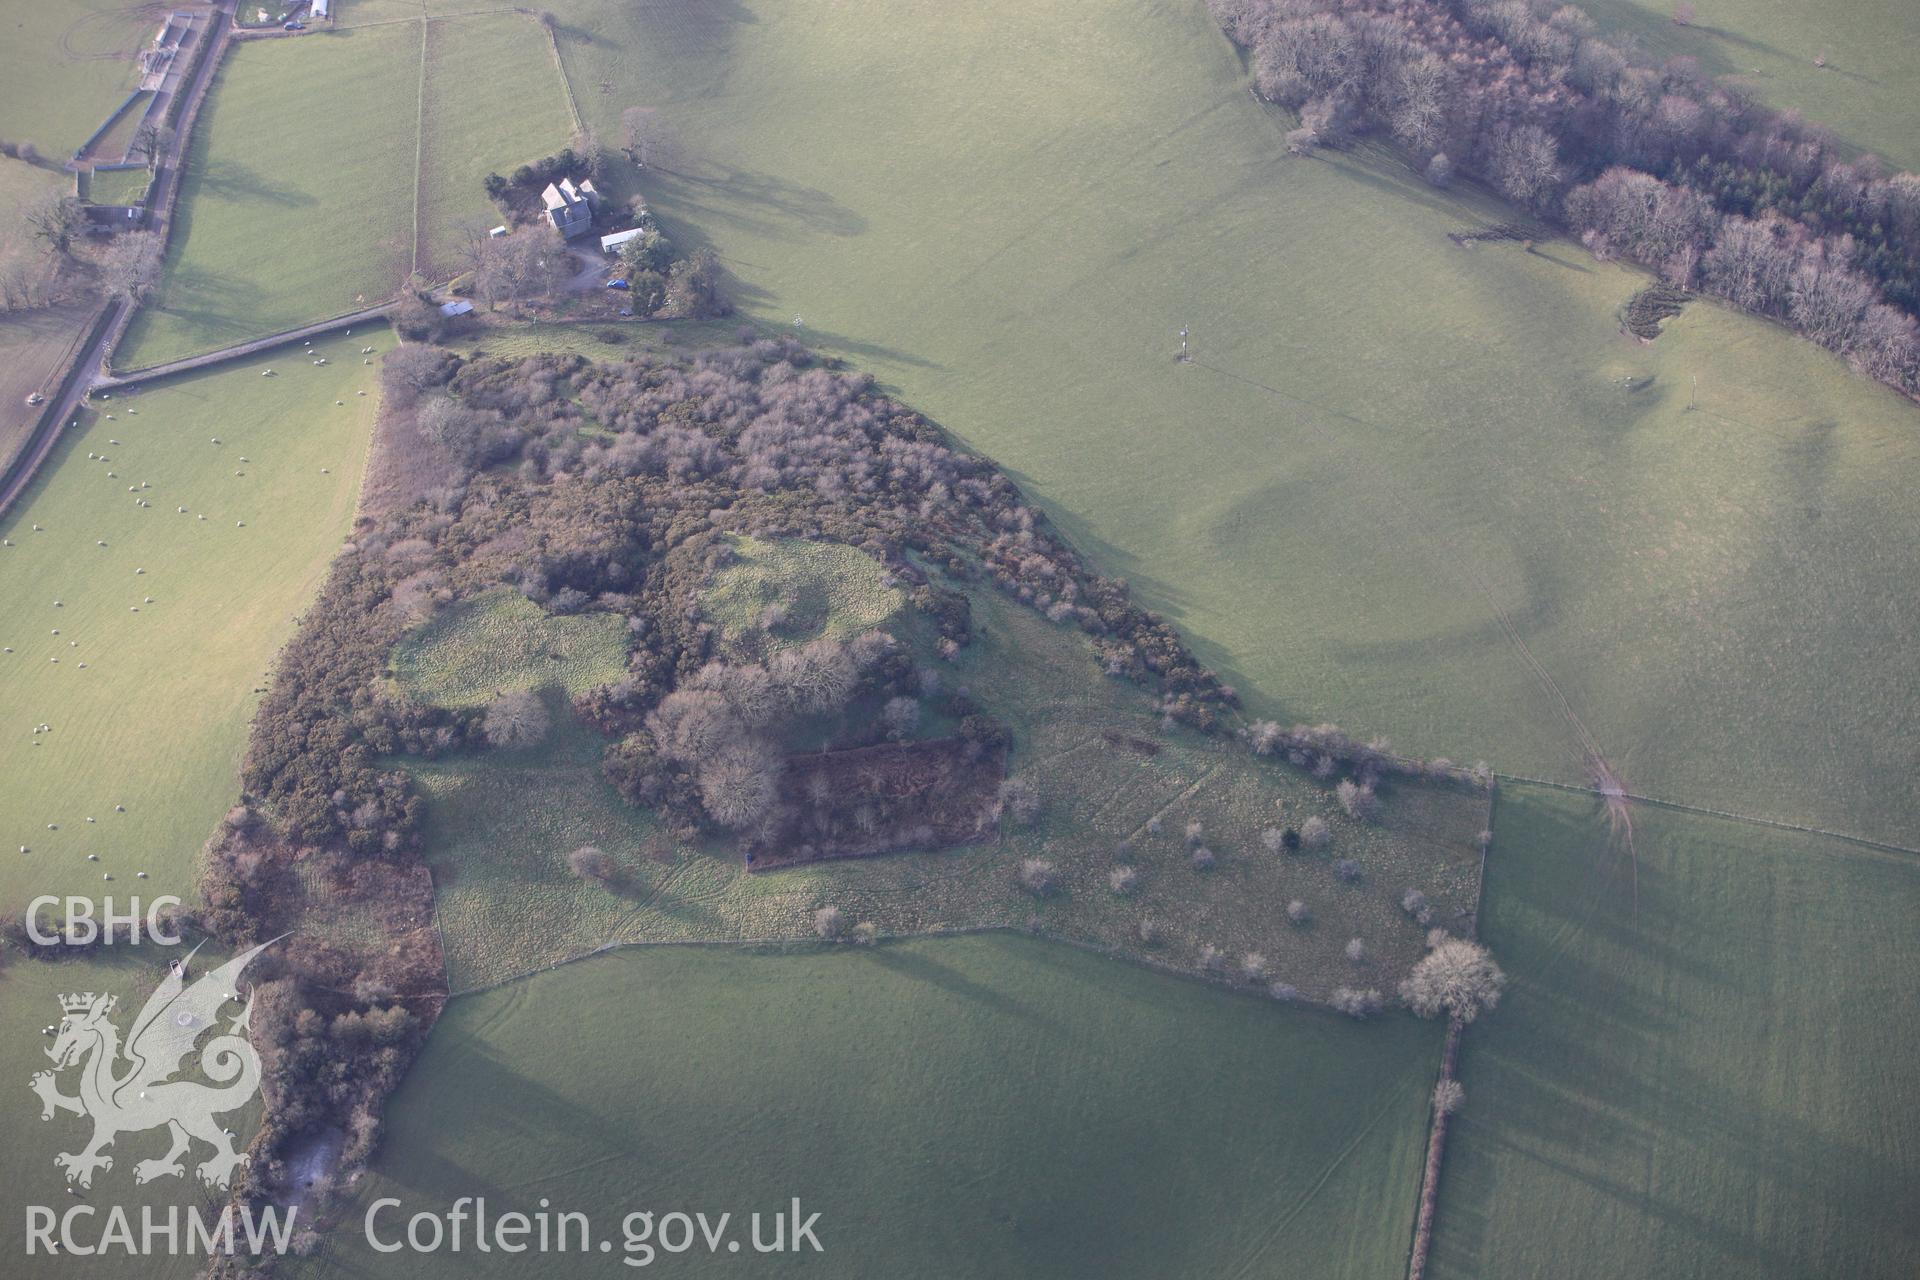 RCAHMW colour oblique photograph of Pen-Y-Castell, Llanilar. Taken by Toby Driver on 07/02/2012.